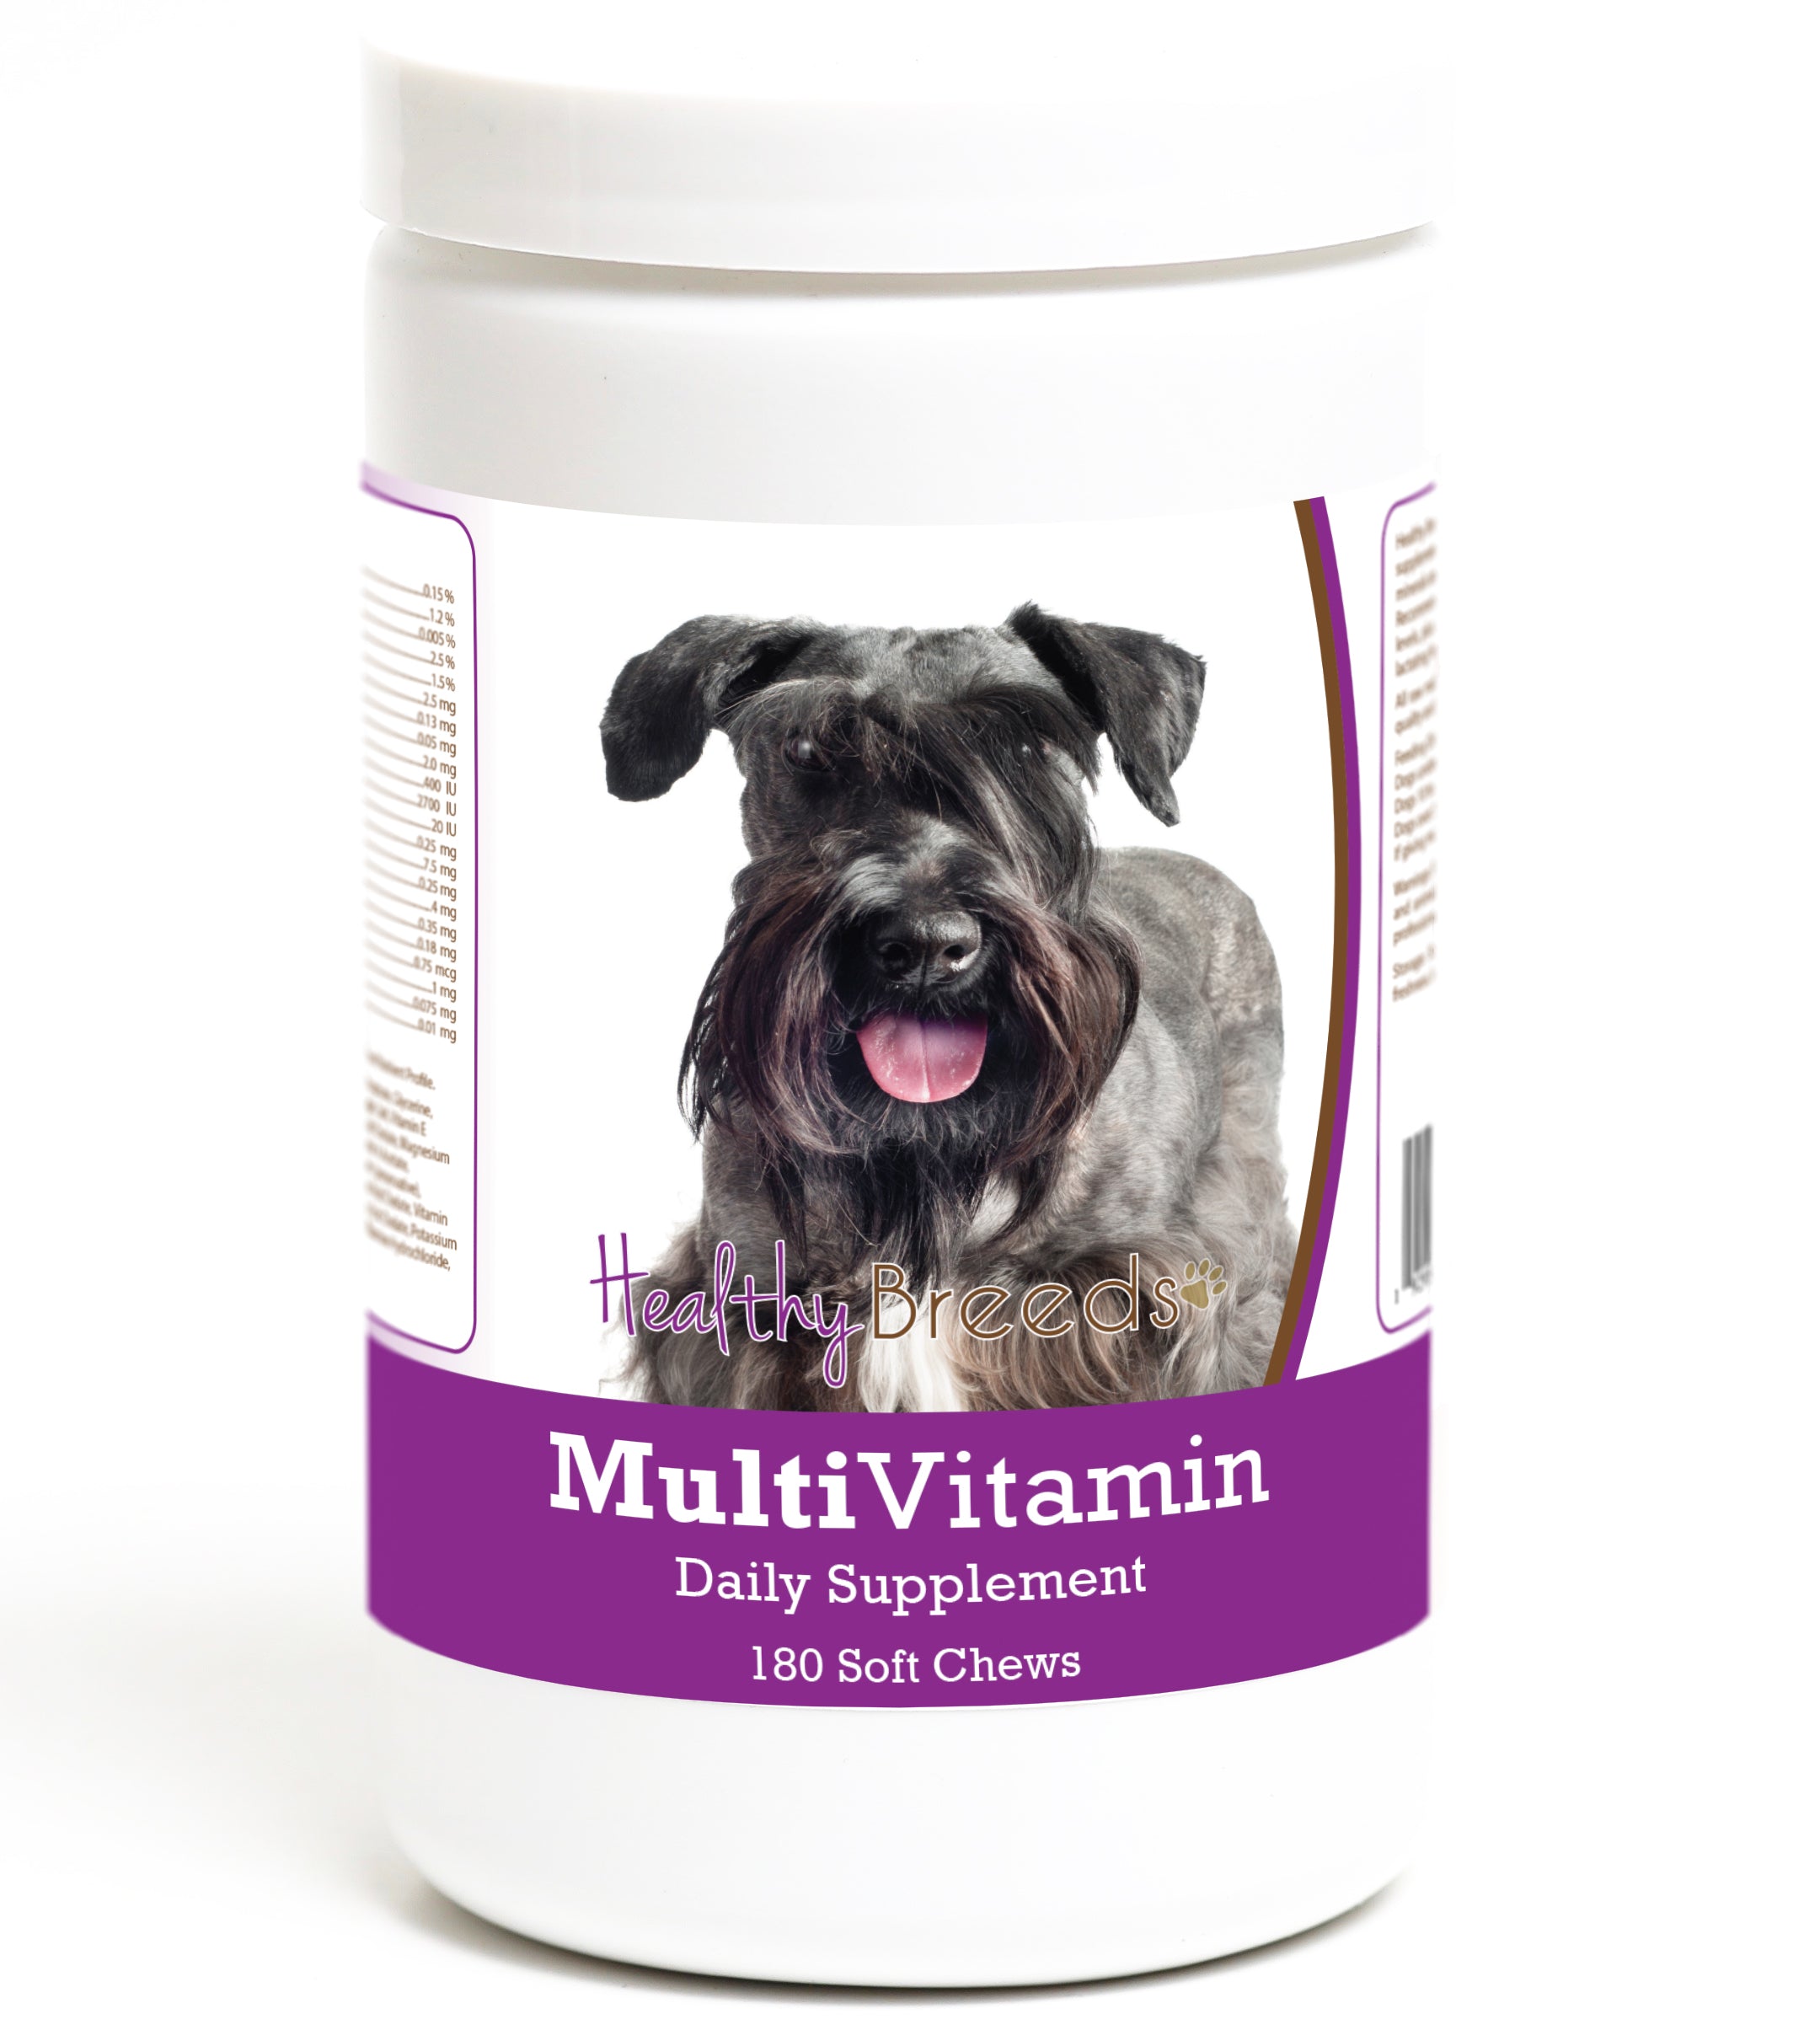 Cesky Terrier Multivitamin Soft Chew for Dogs 180 Count